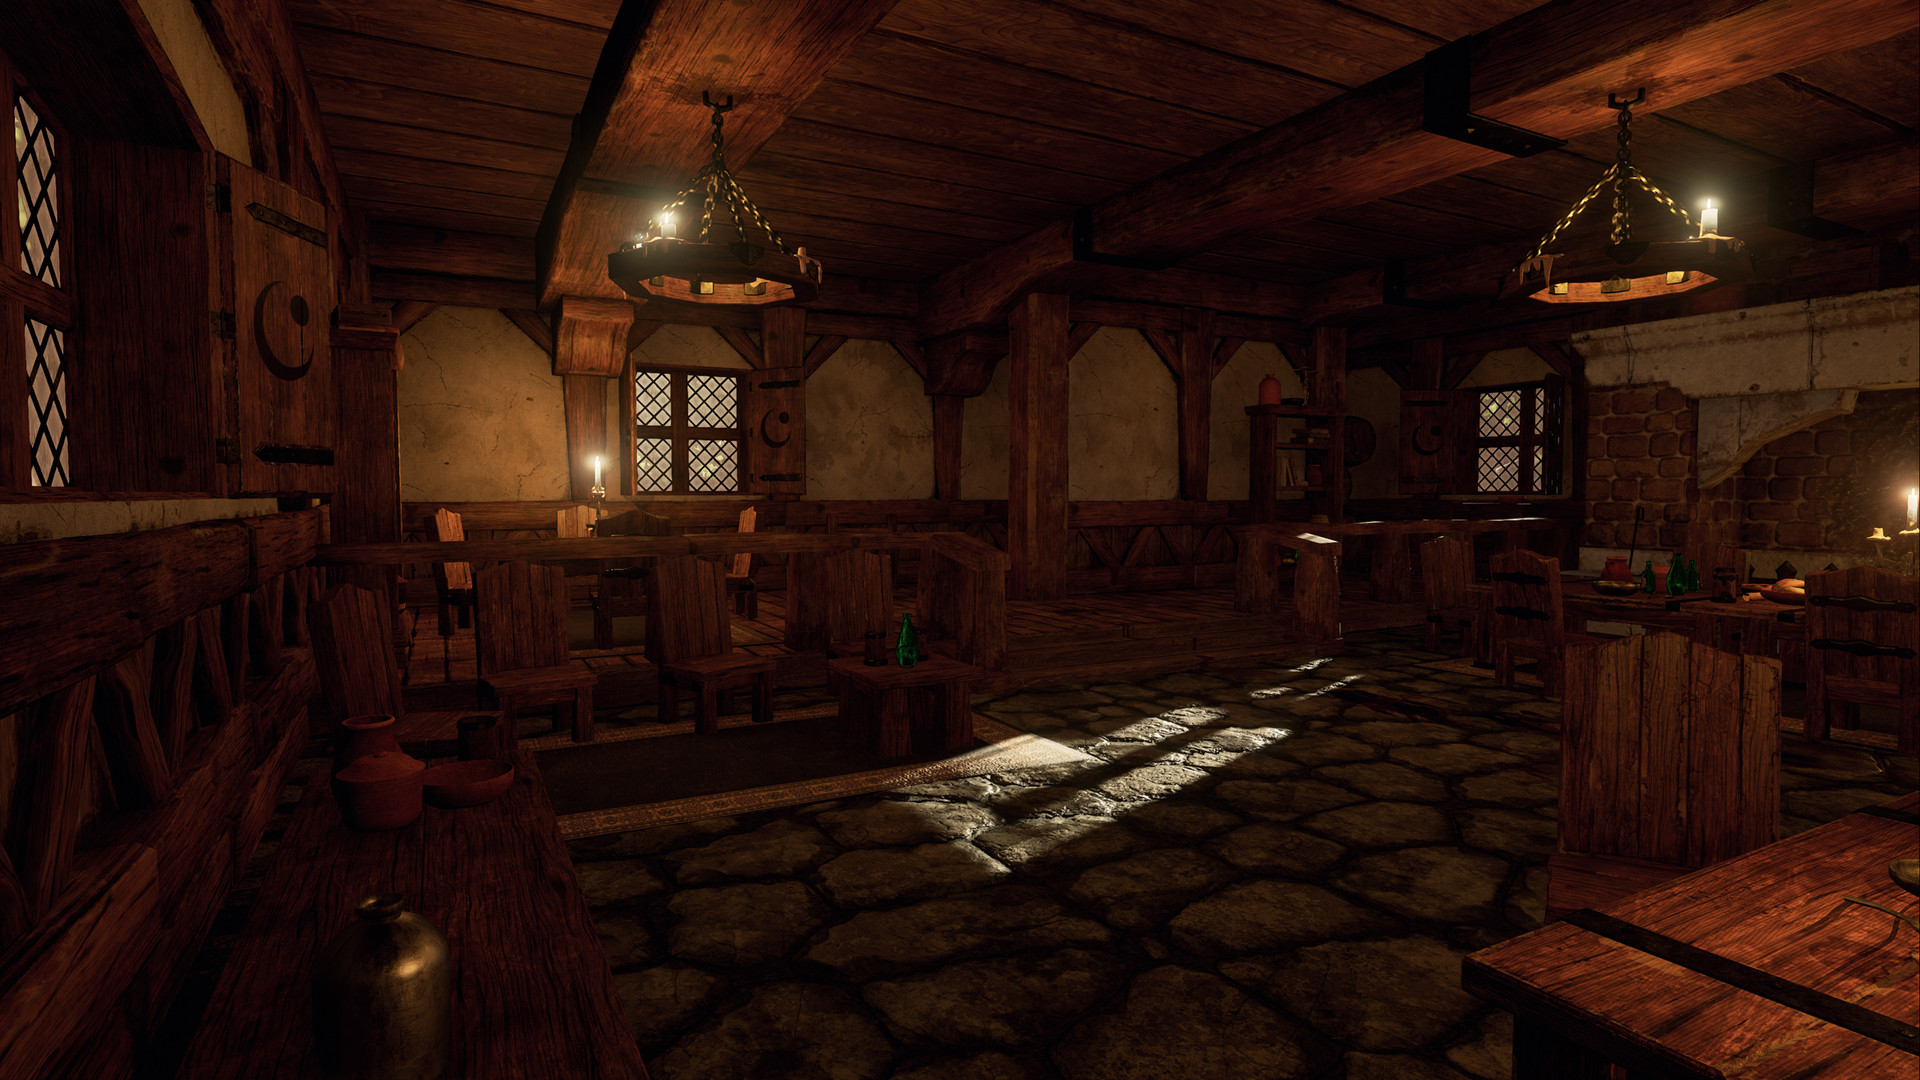 WoW’s Goldshire Inn Looks Great In Unreal Engine 4, Despite The Murder